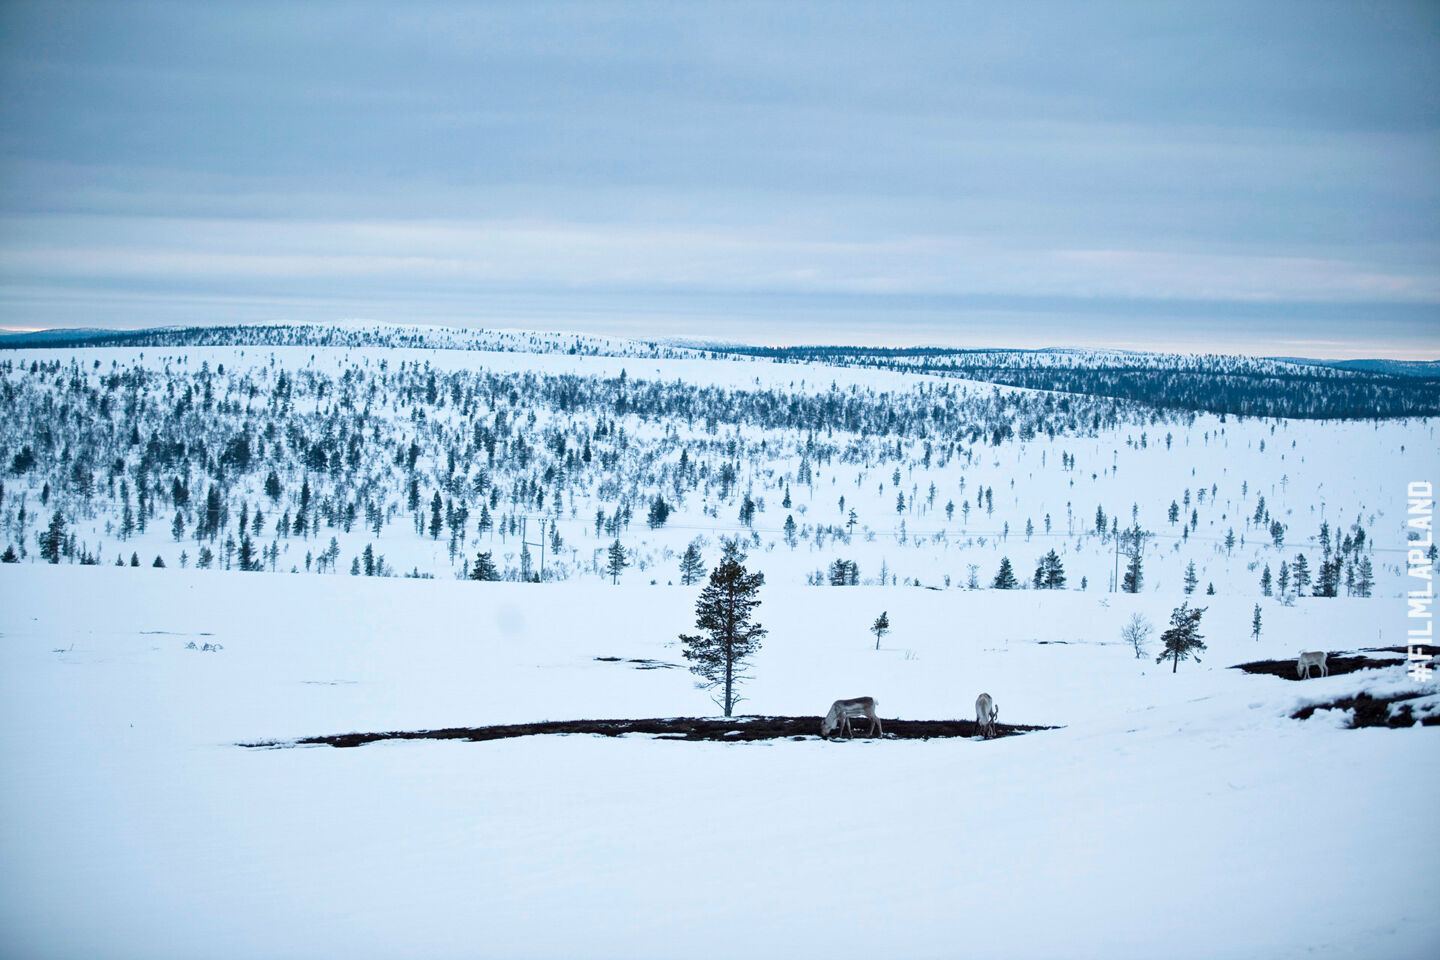 A reindeer roots through the snow in Inari, a Finnish Lapland filming location